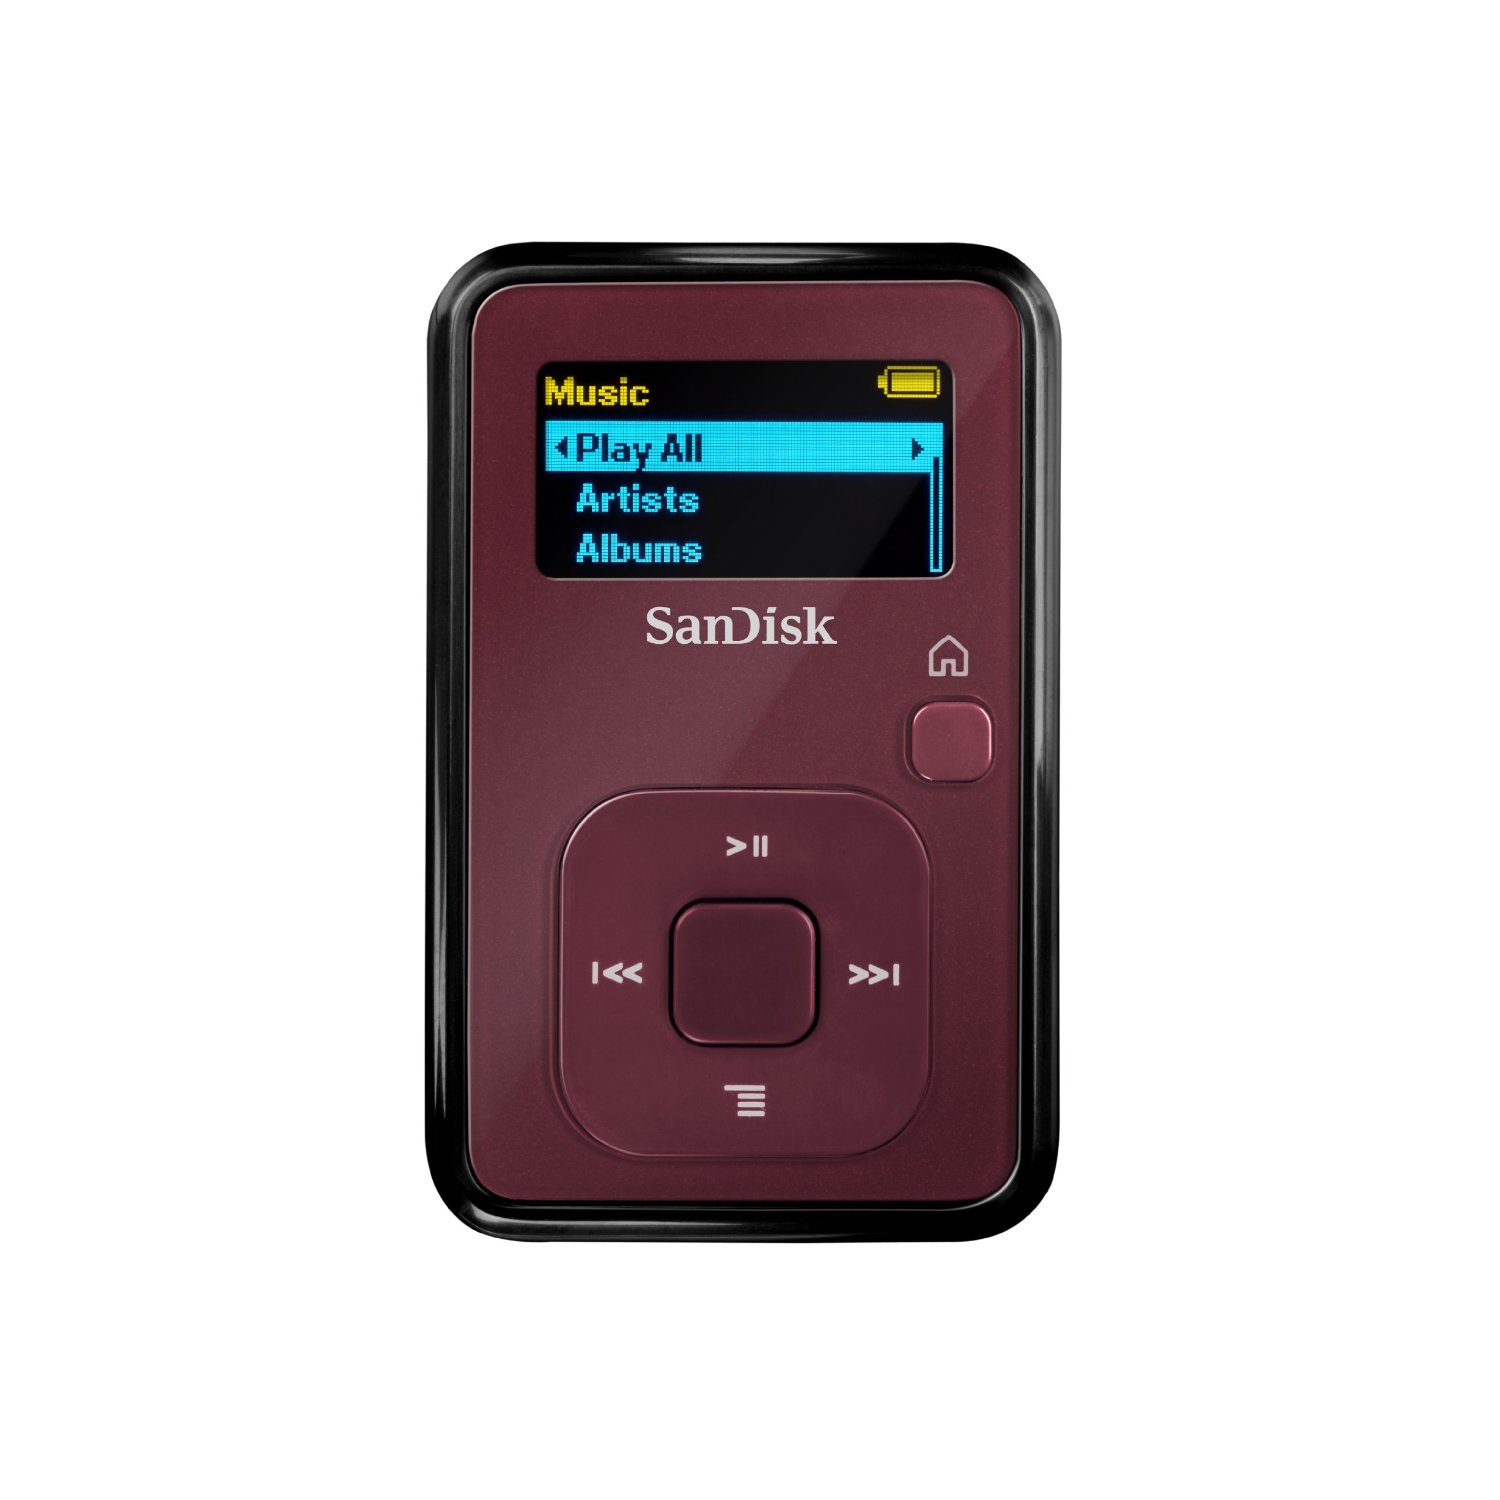 Top 3 MP3 Players That You Could Buy Under $50 In 2014